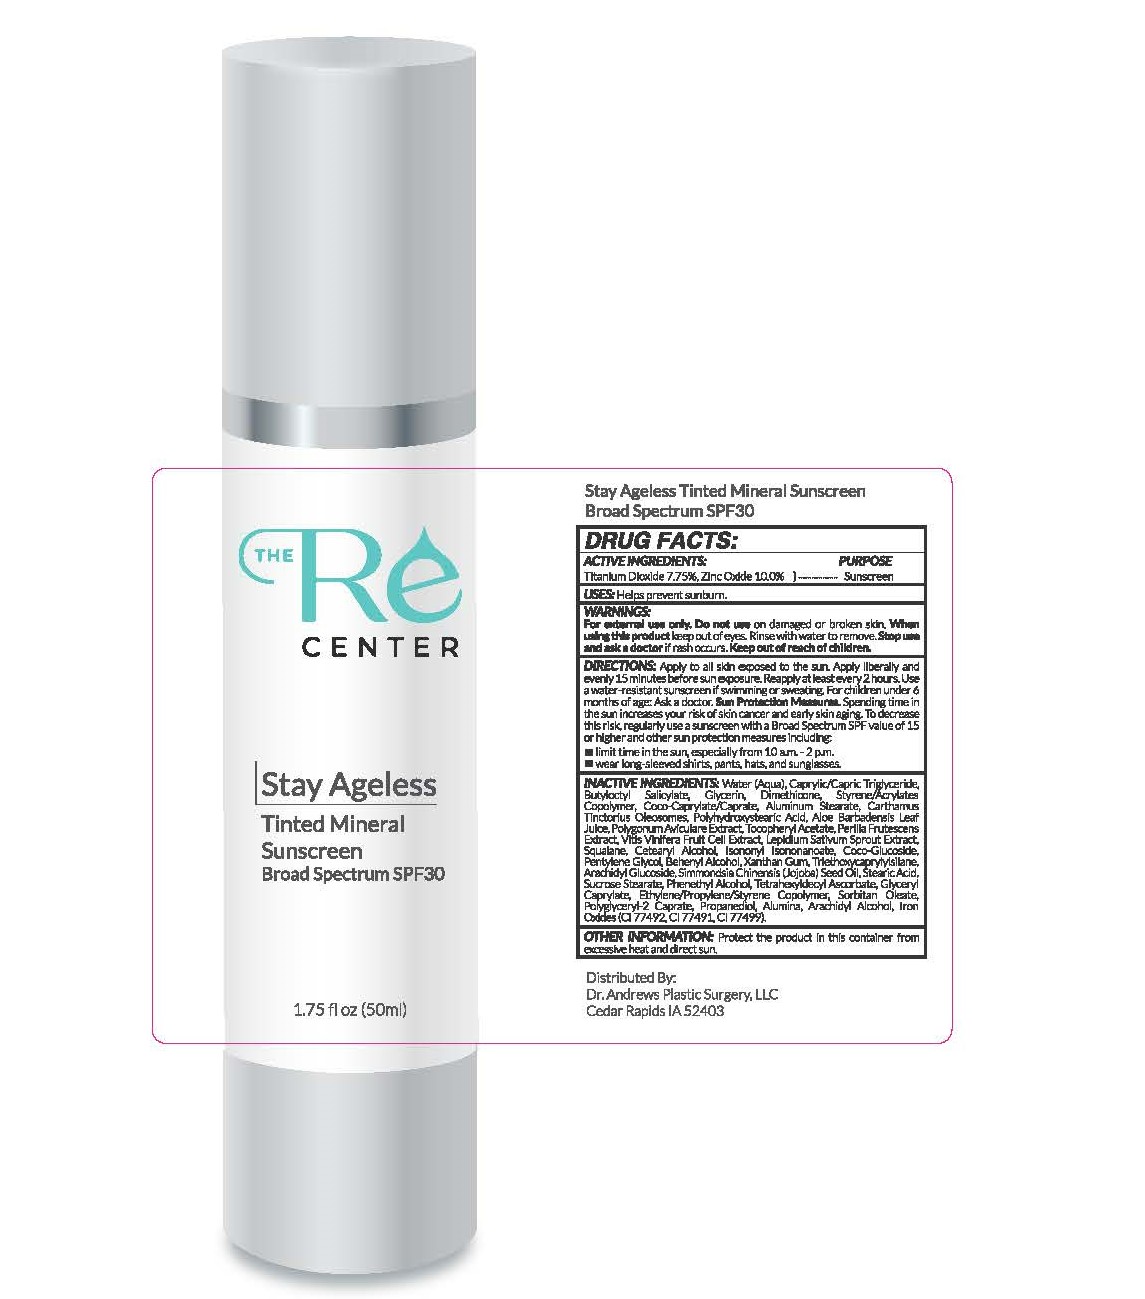 The ReCenter Stay Ageless Tinted Mineral Sunscreen Broad Spectrum SPF 30 1.75 fl oz (50ml)